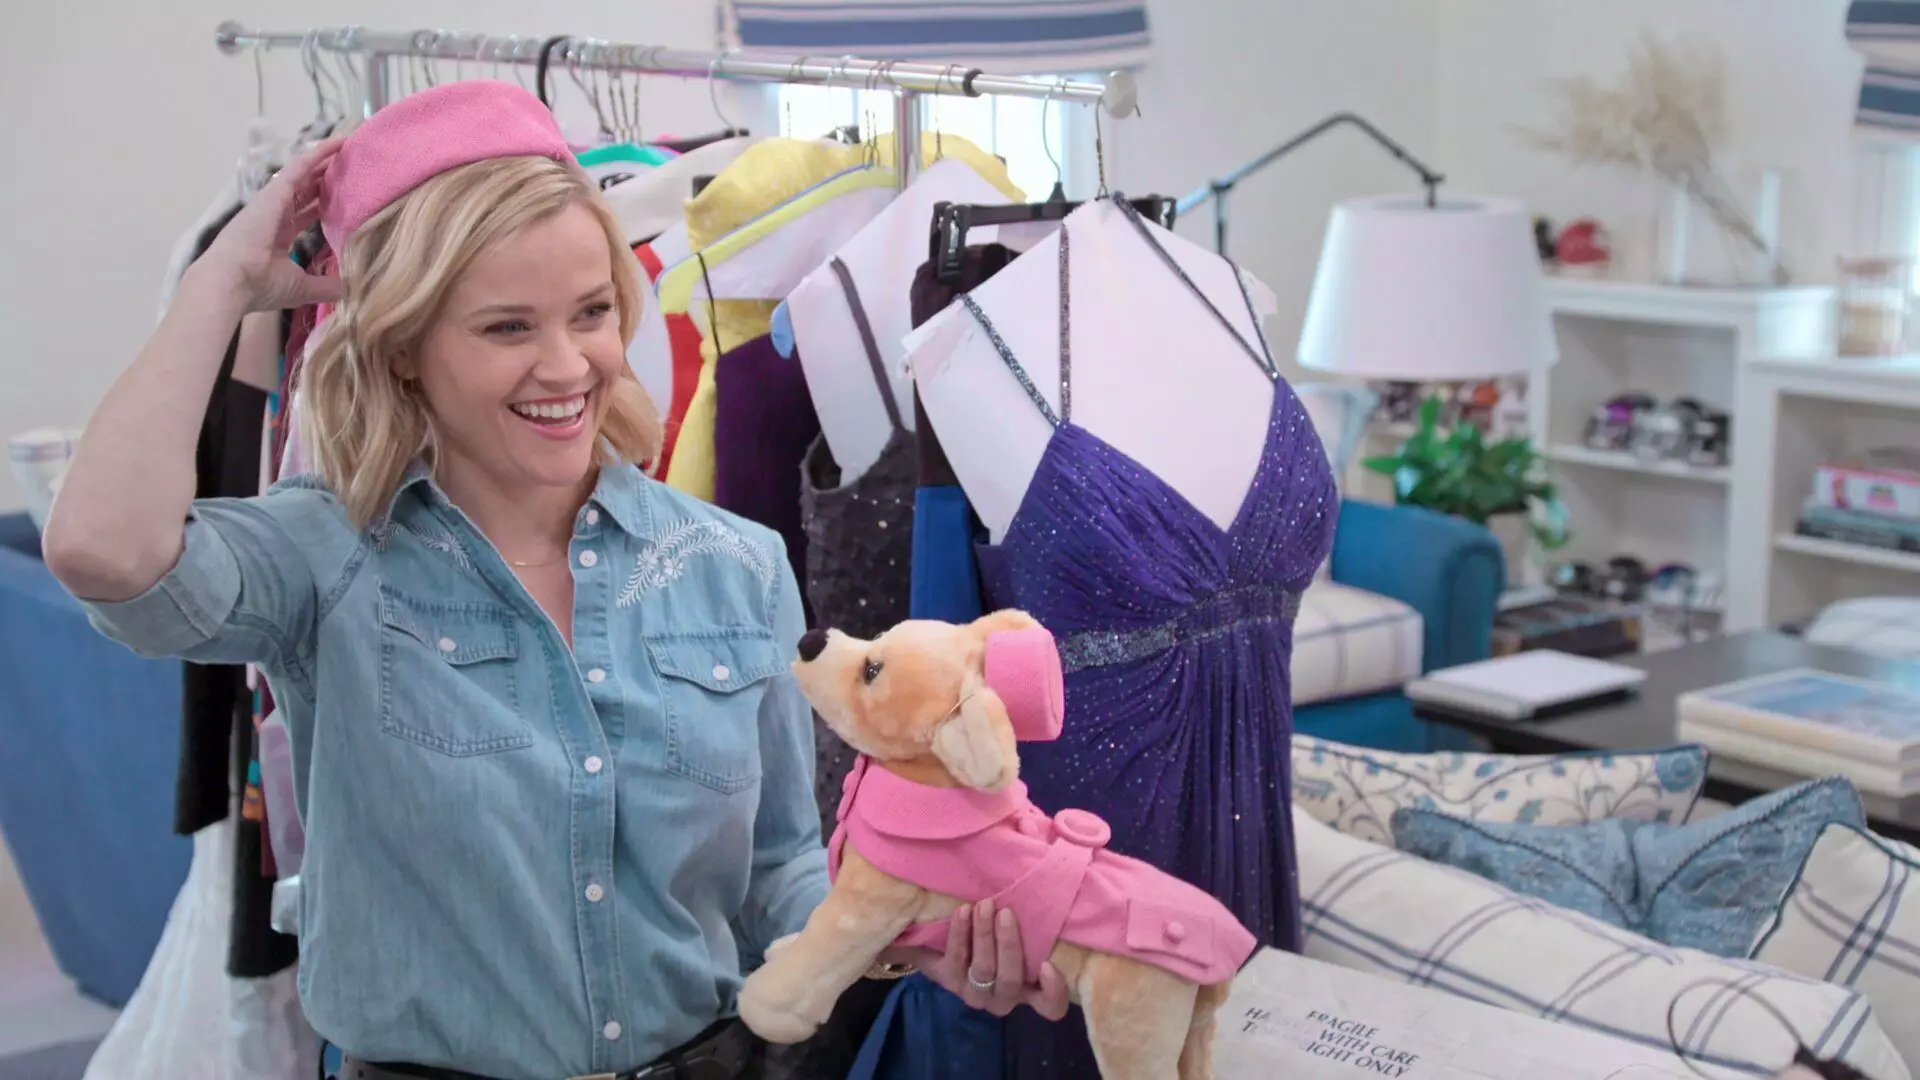 The cleaning-themed series gave viewers a glimpse inside Reese's wardrobe - including her outfits from 'Legally Blonde' (